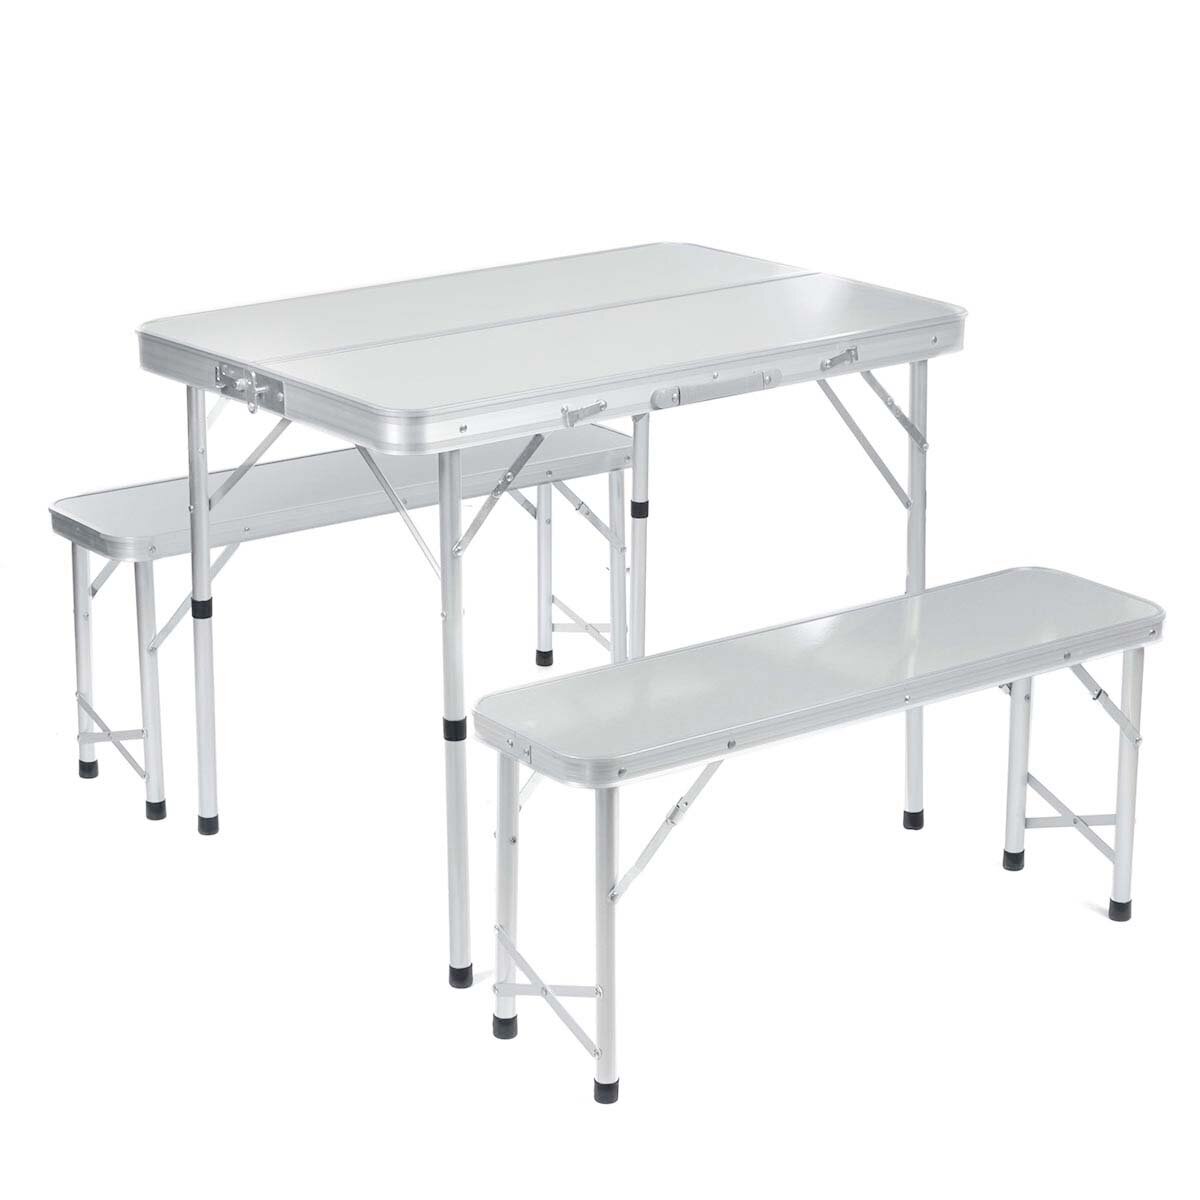 

Aluminum Folding Camping Picnic Table With 2 Bench Chair Stool Seat Portable Set